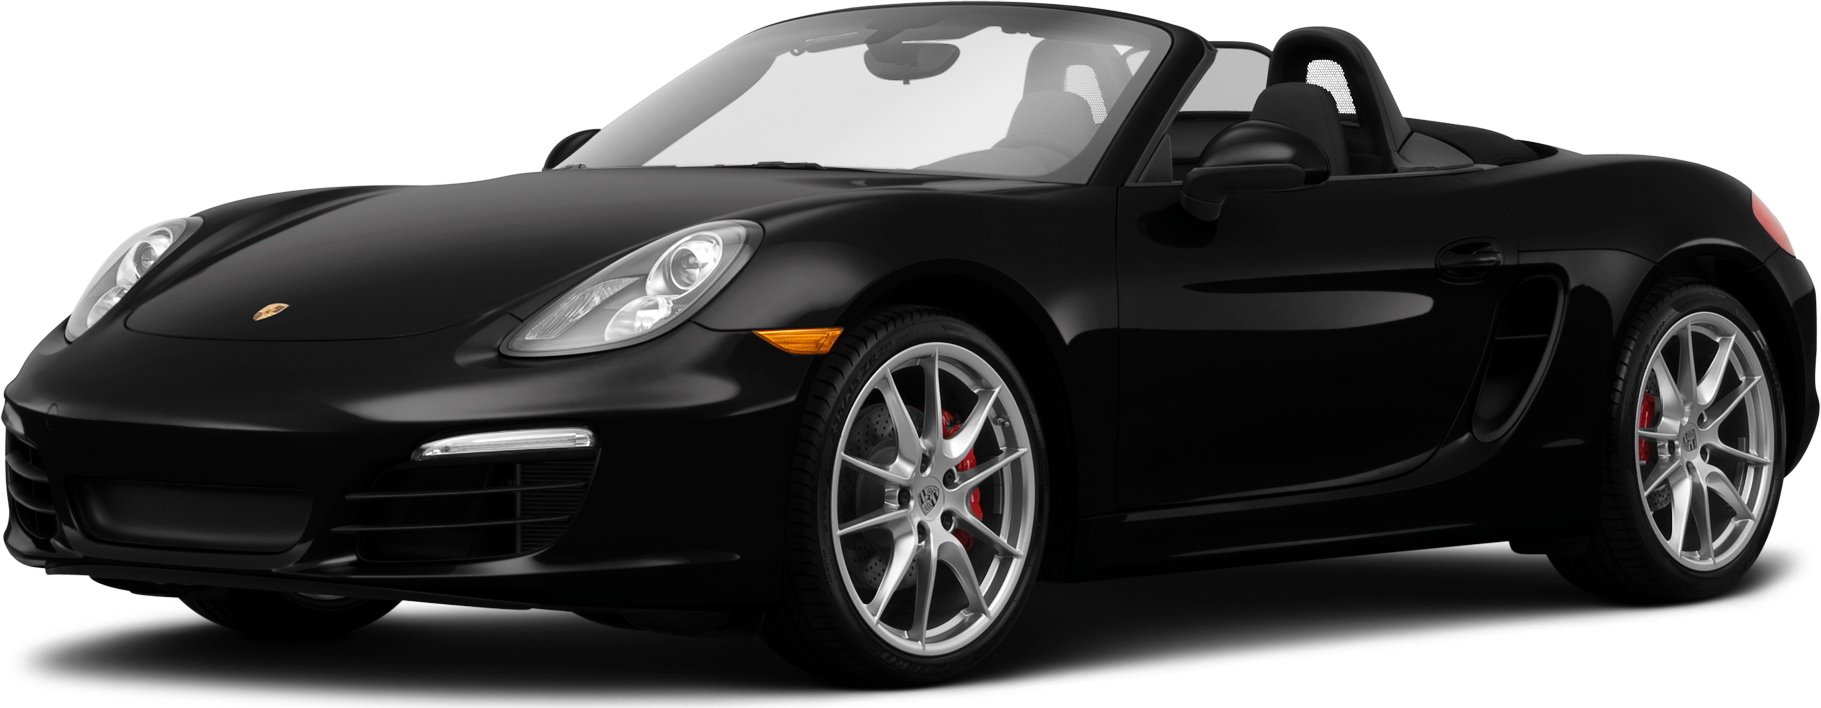 2014 Porsche Boxster Price, Value, Ratings & Reviews | Kelley Blue Book